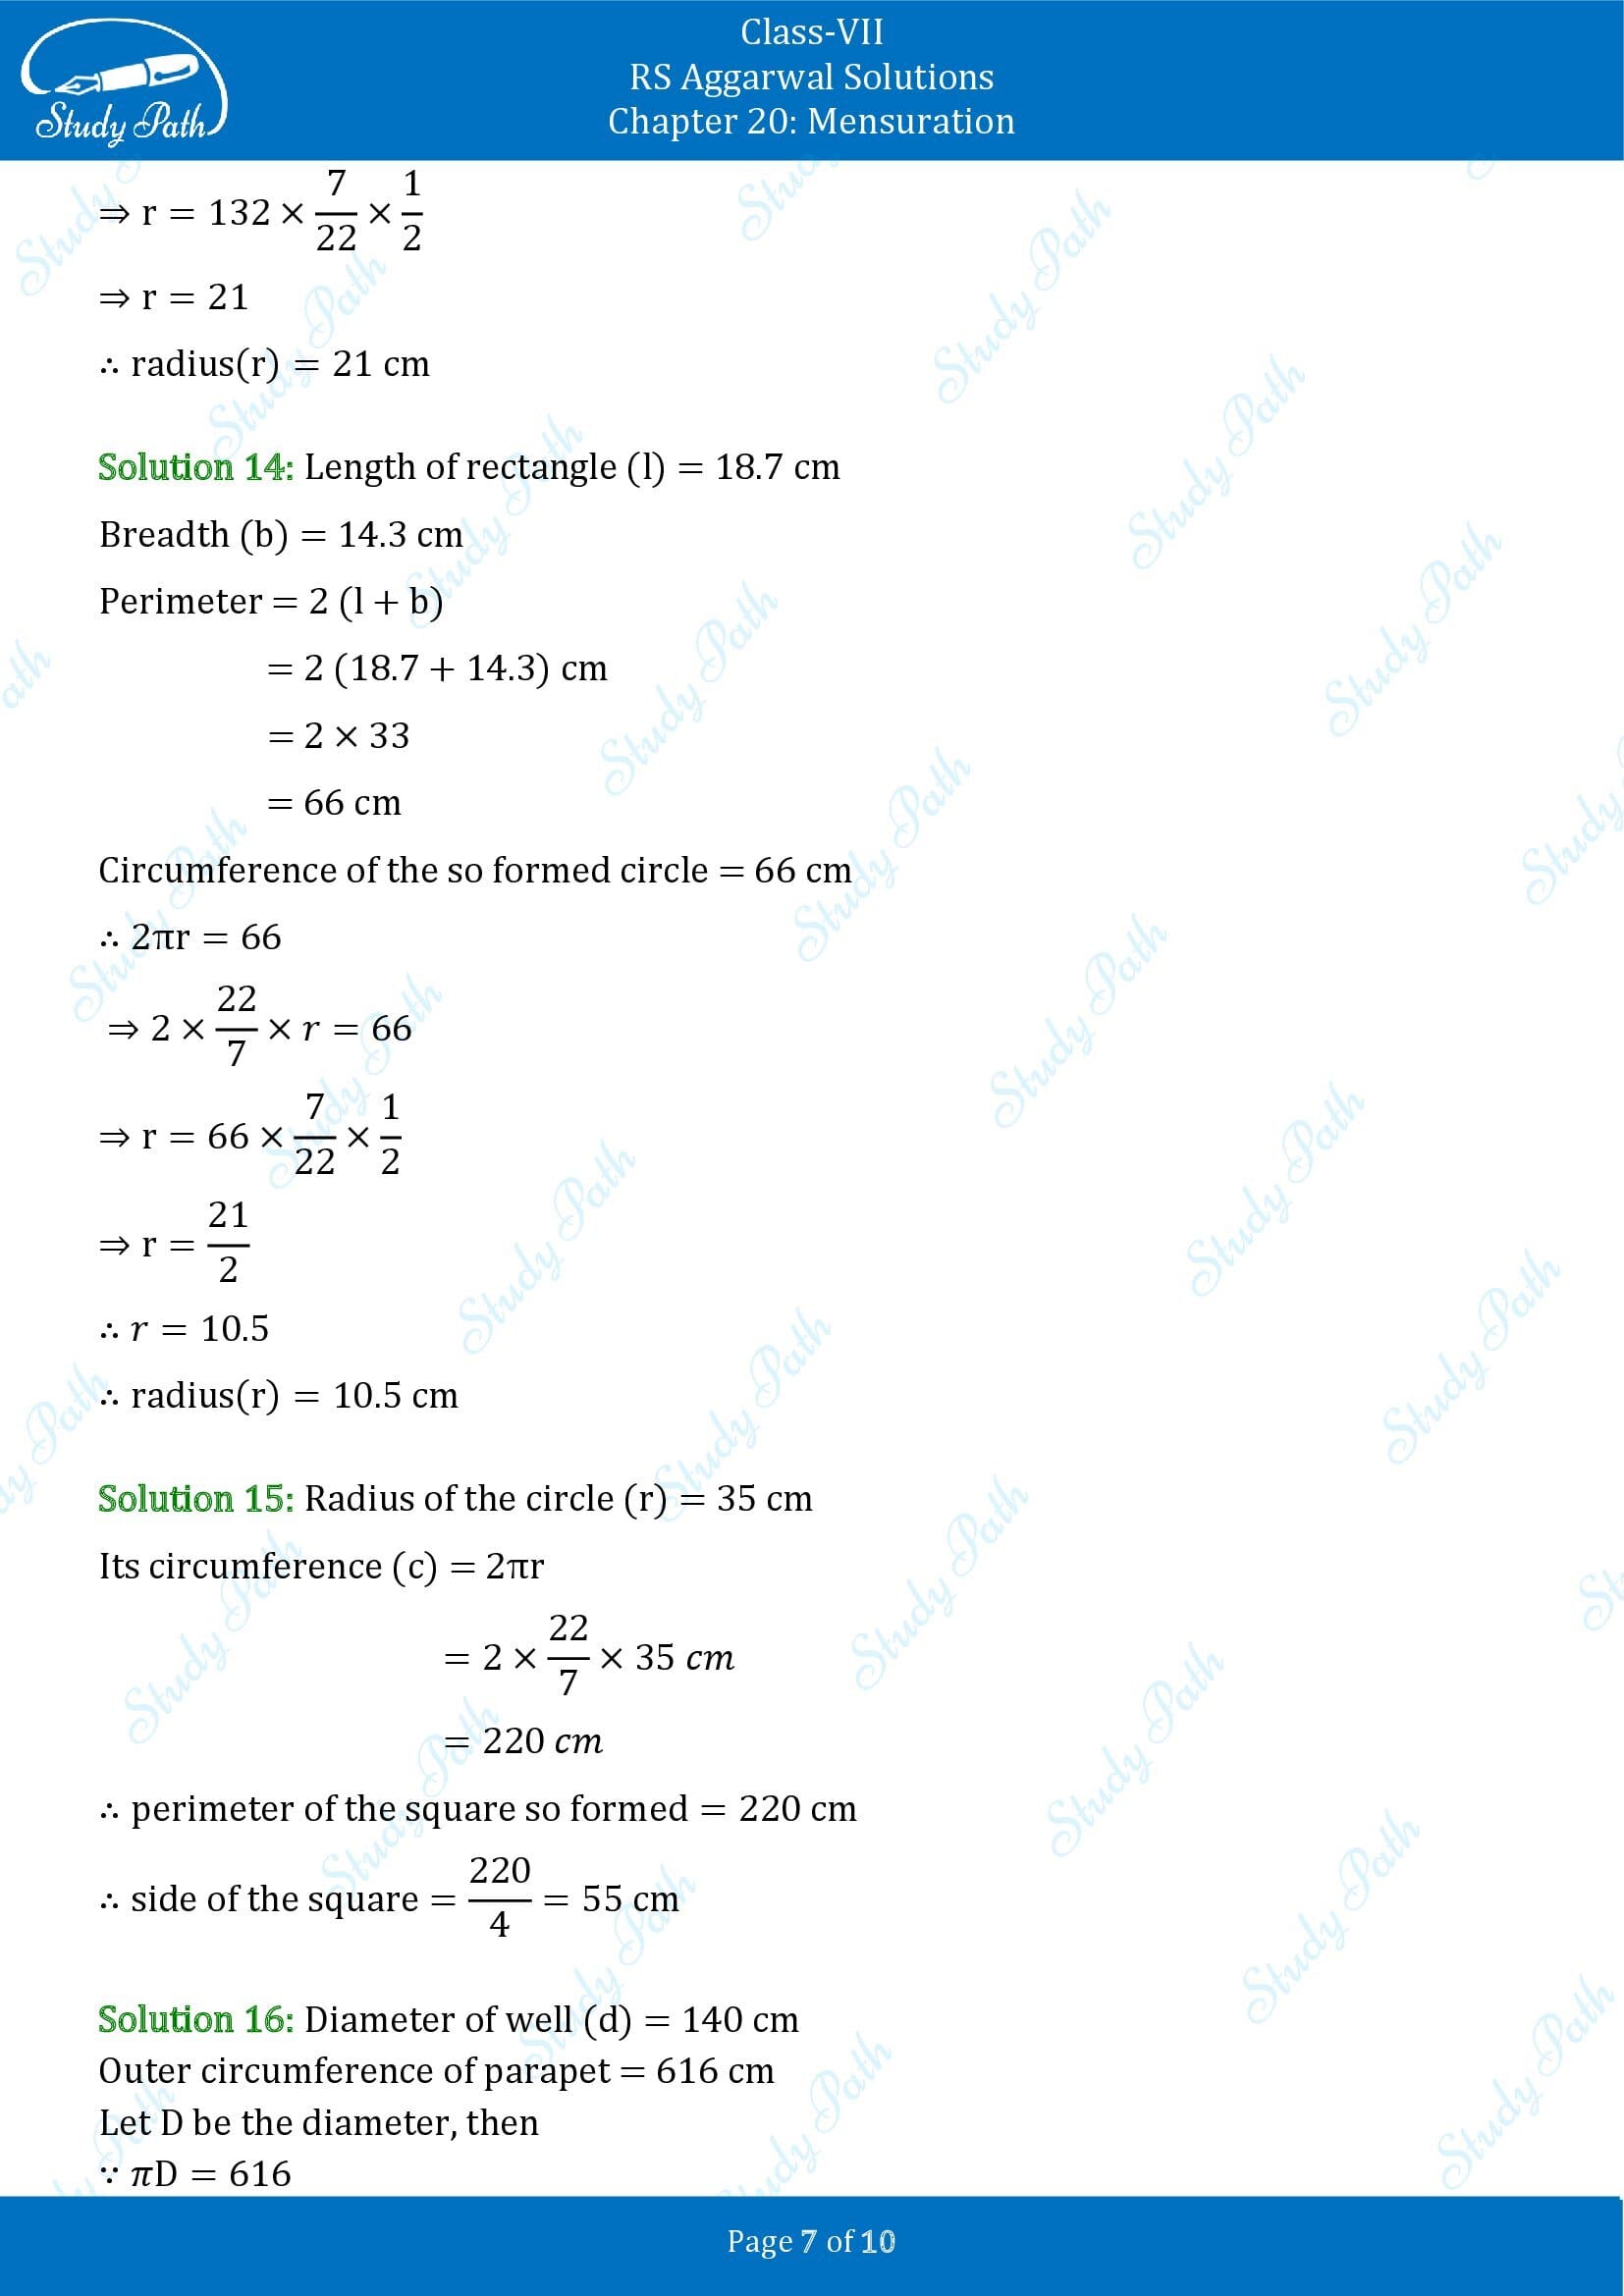 RS Aggarwal Solutions Class 7 Chapter 20 Mensuration Exercise 20E 00007